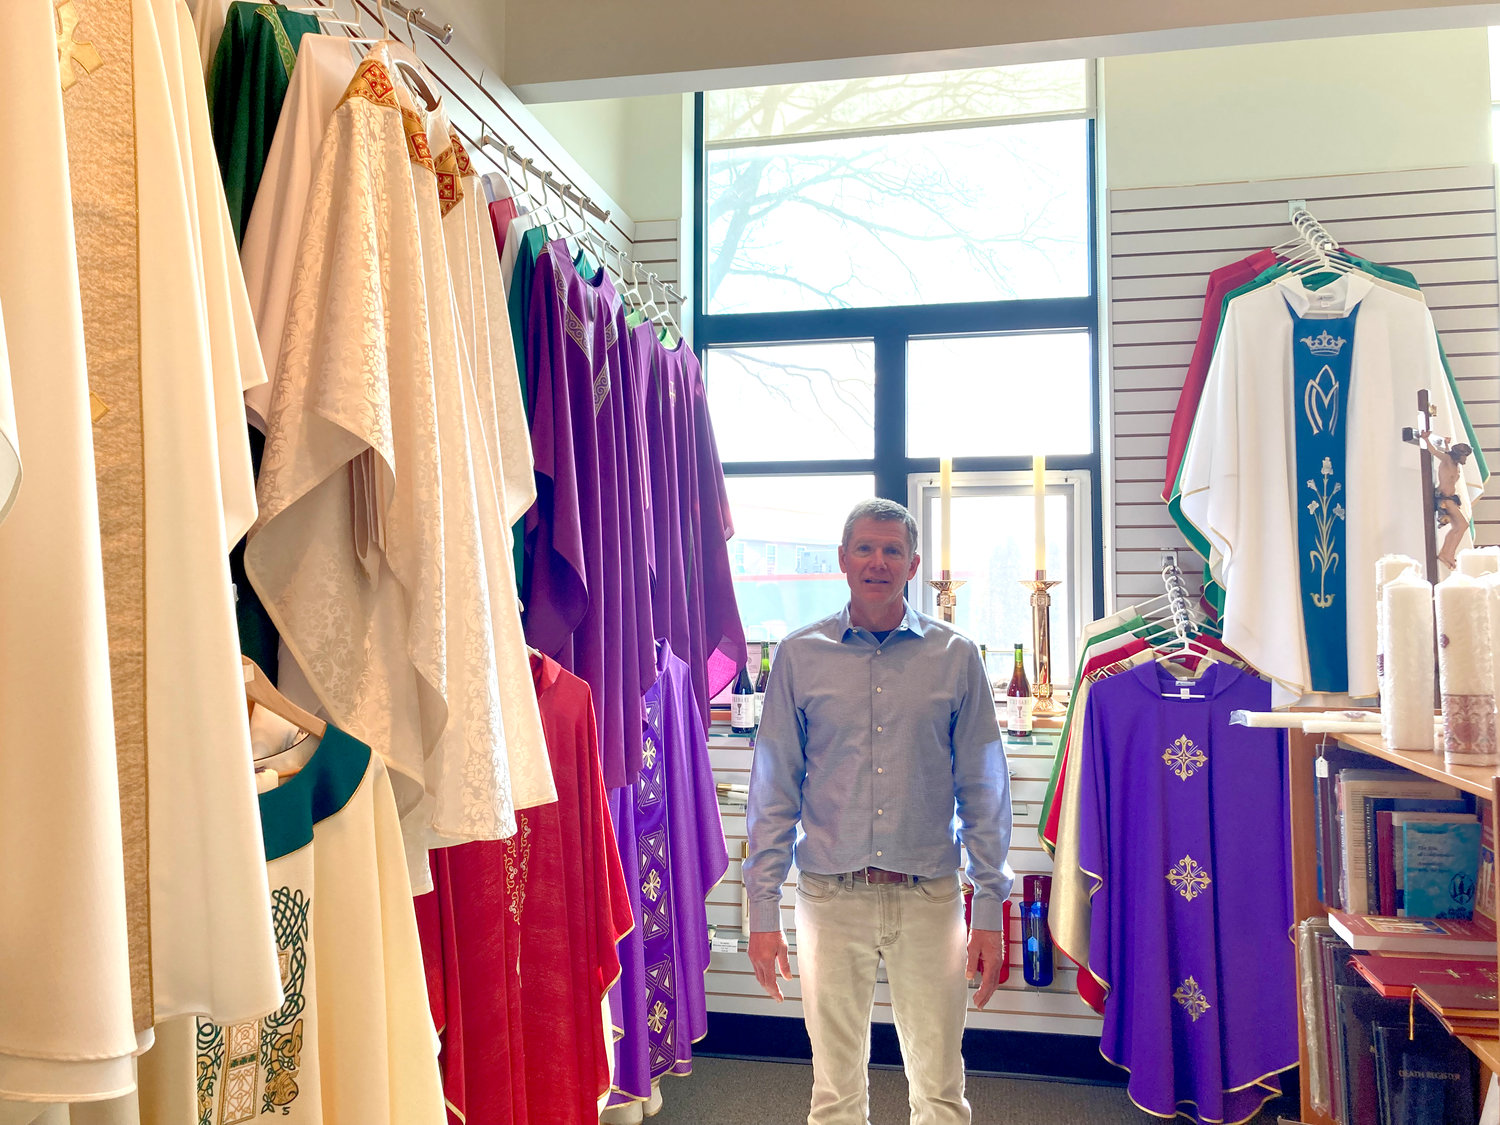 FIFTH-GENERATION: PJ Tally has worked in the family-business since 1986. Tally’s sells items for churches including bread, wine and candles. (Cranston Herald photos)